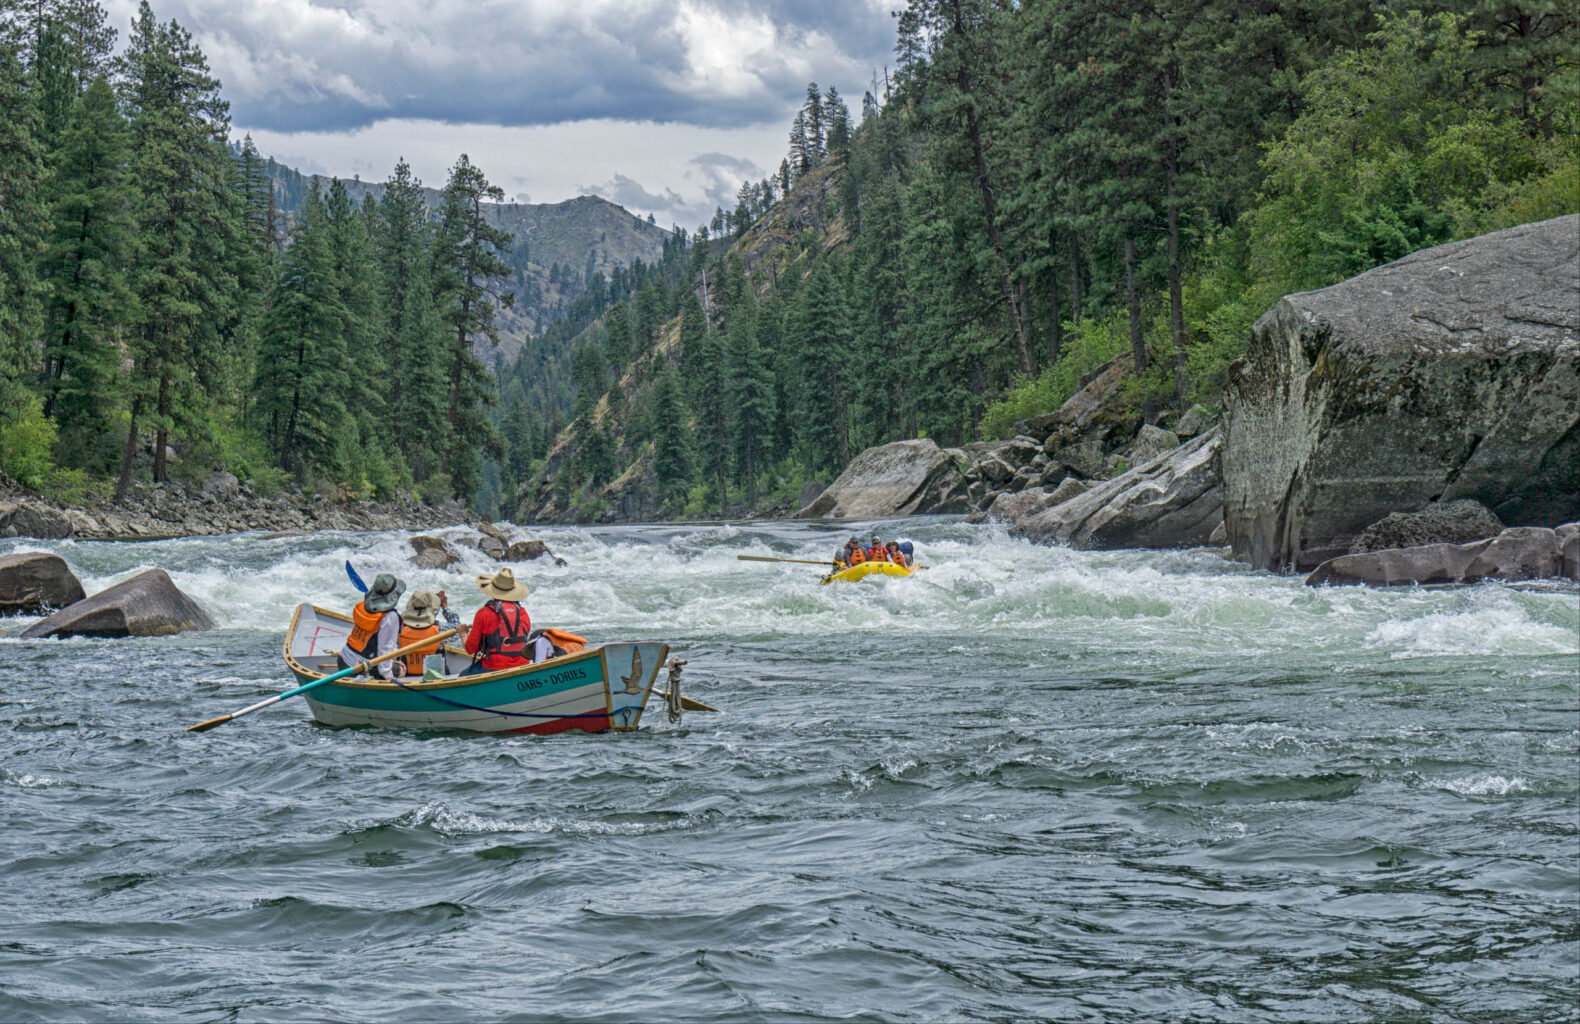 Groups in row boats on the Salmon River in Idaho.